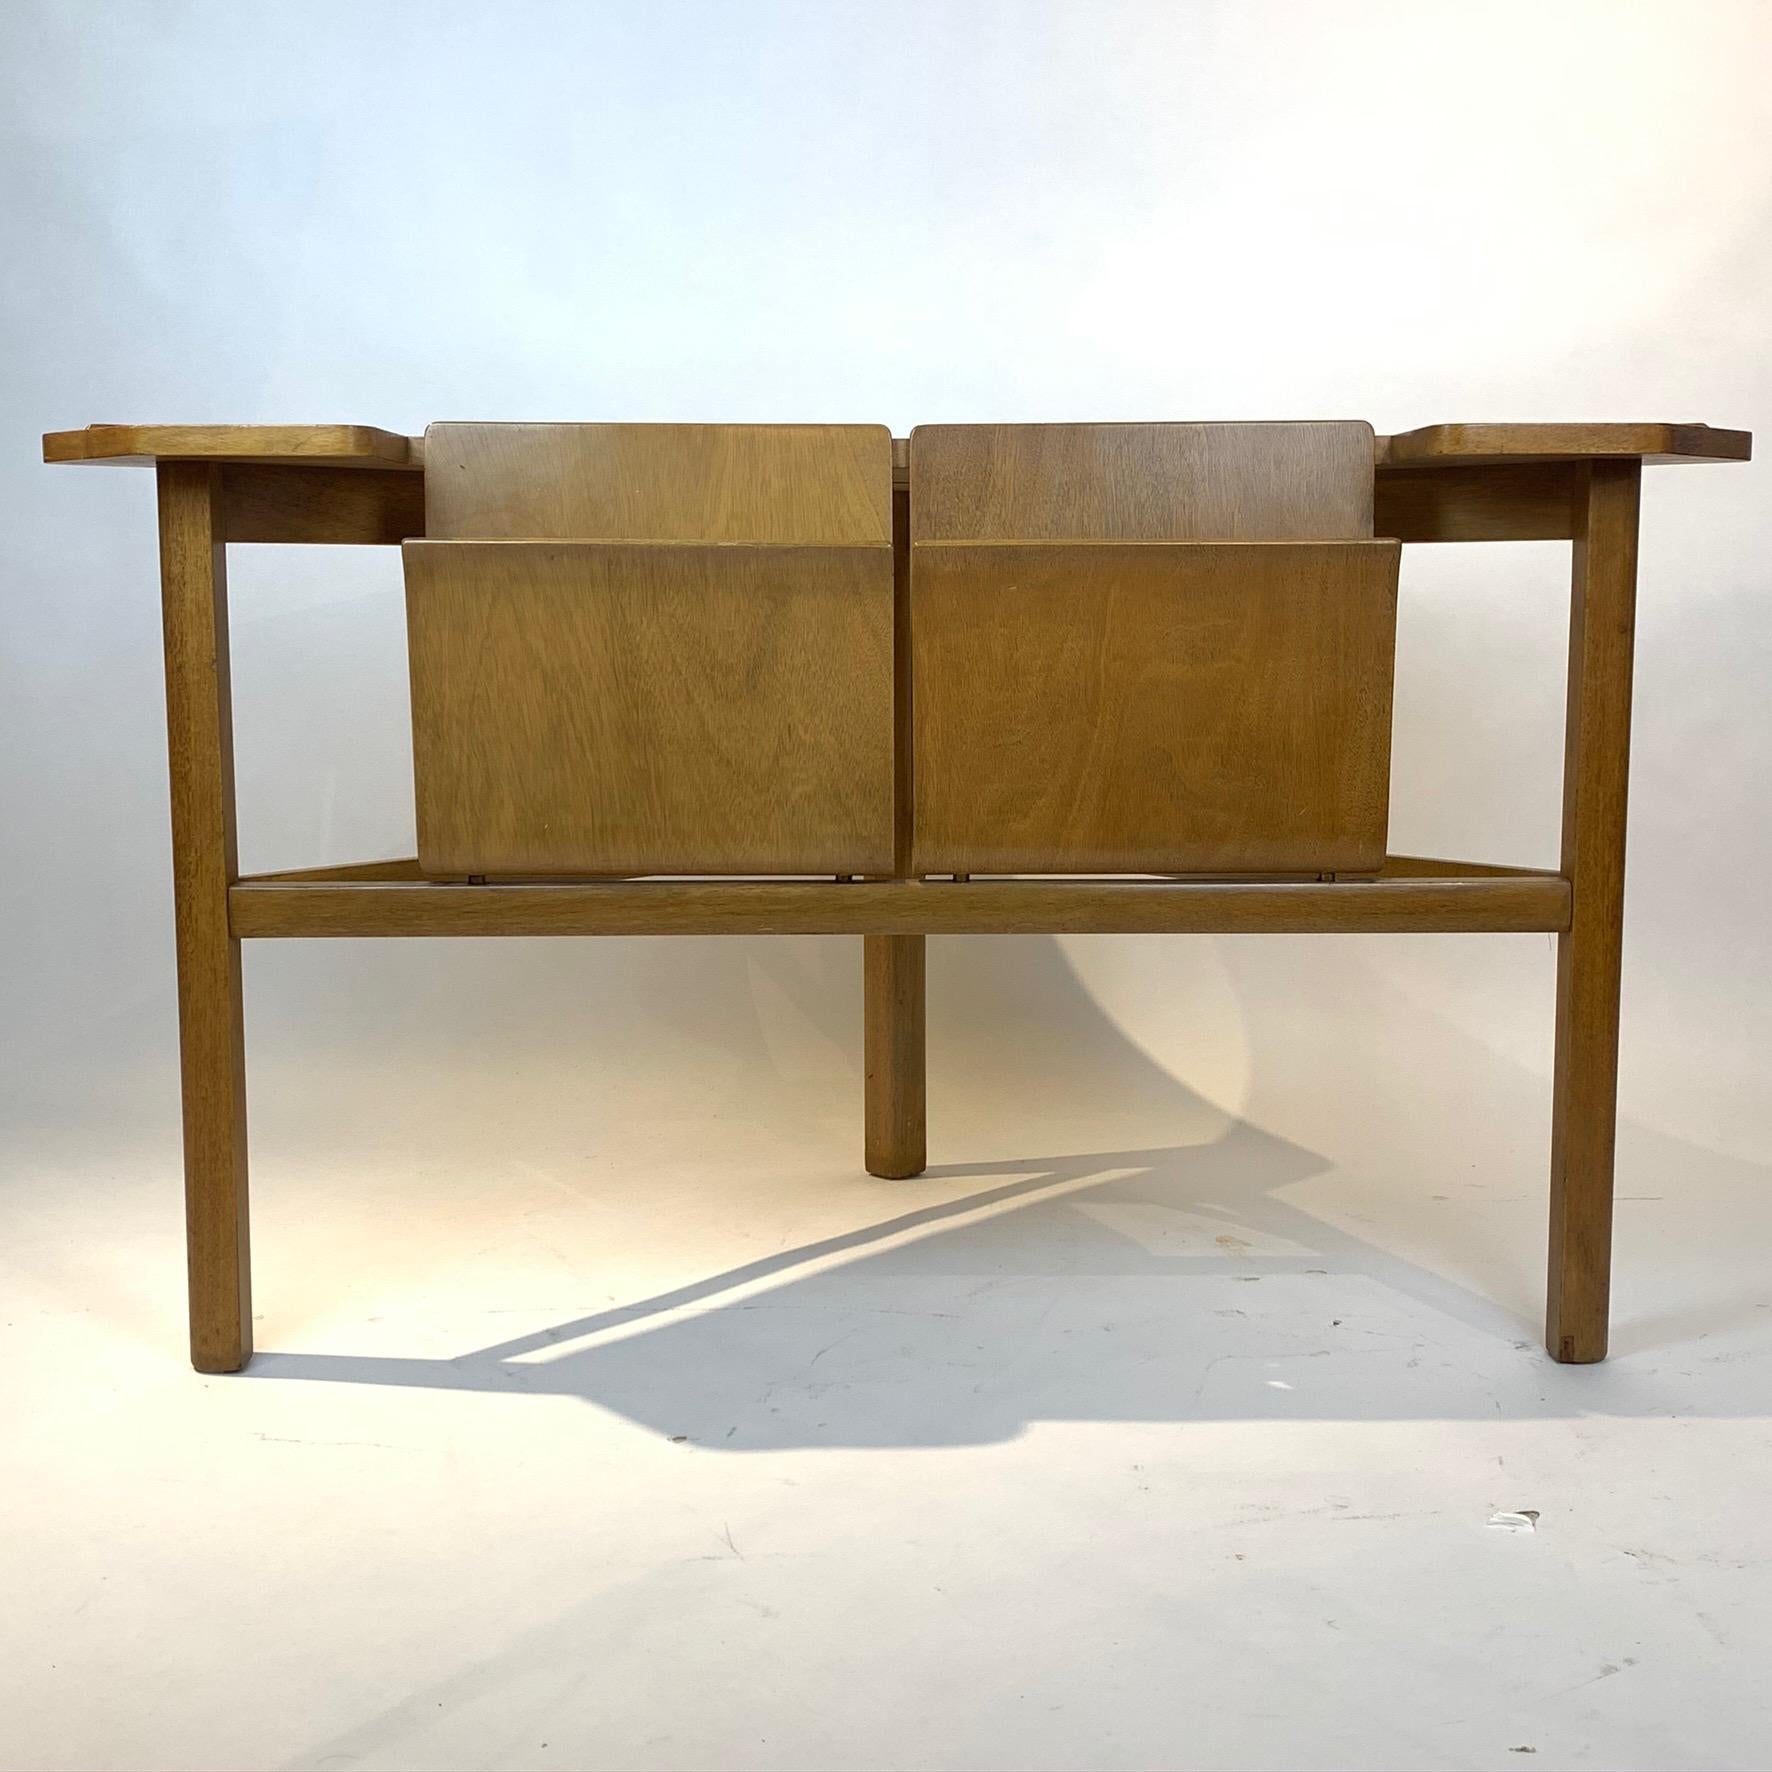 A seldom offered Dunbar corner/magazine table designed by Edward Wormley with bent plywood magazine or record compartments .Labeled with warm original finish and patina.